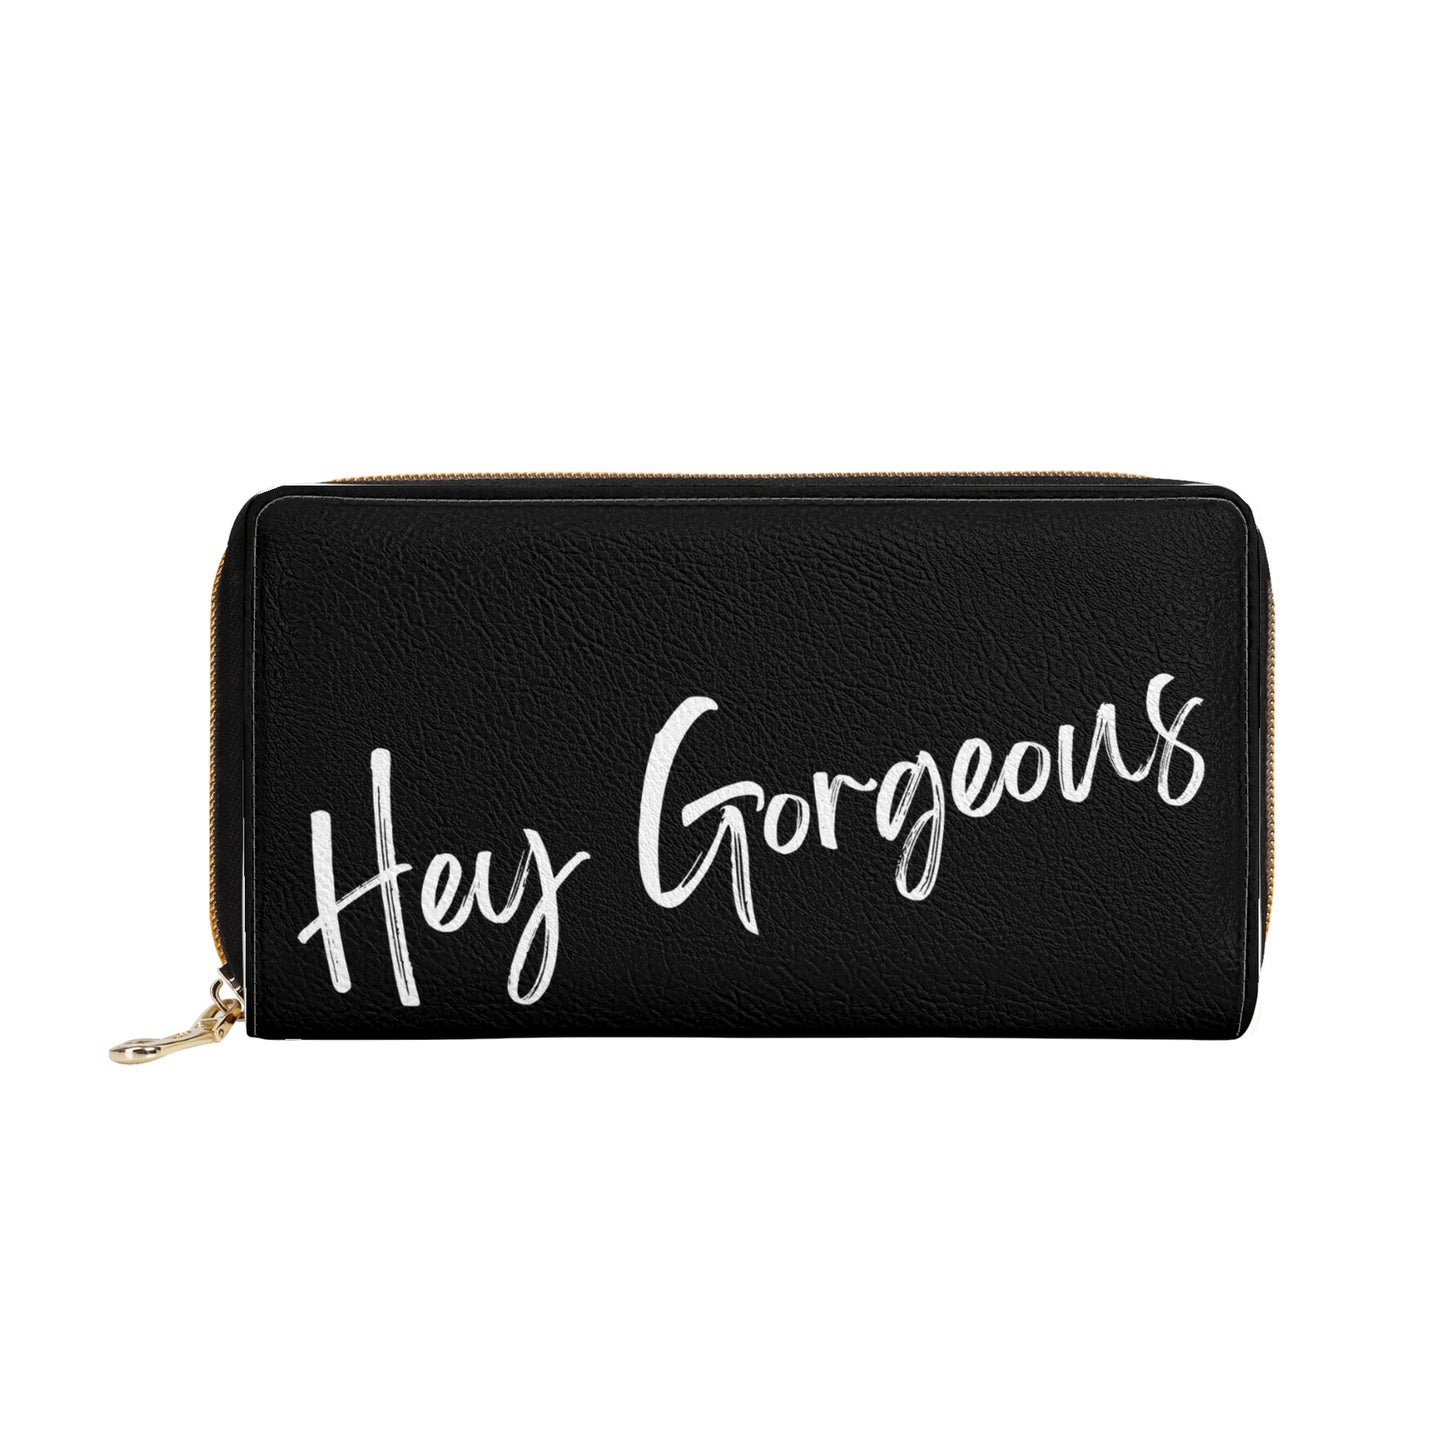 Hey Gorgeous Wallet